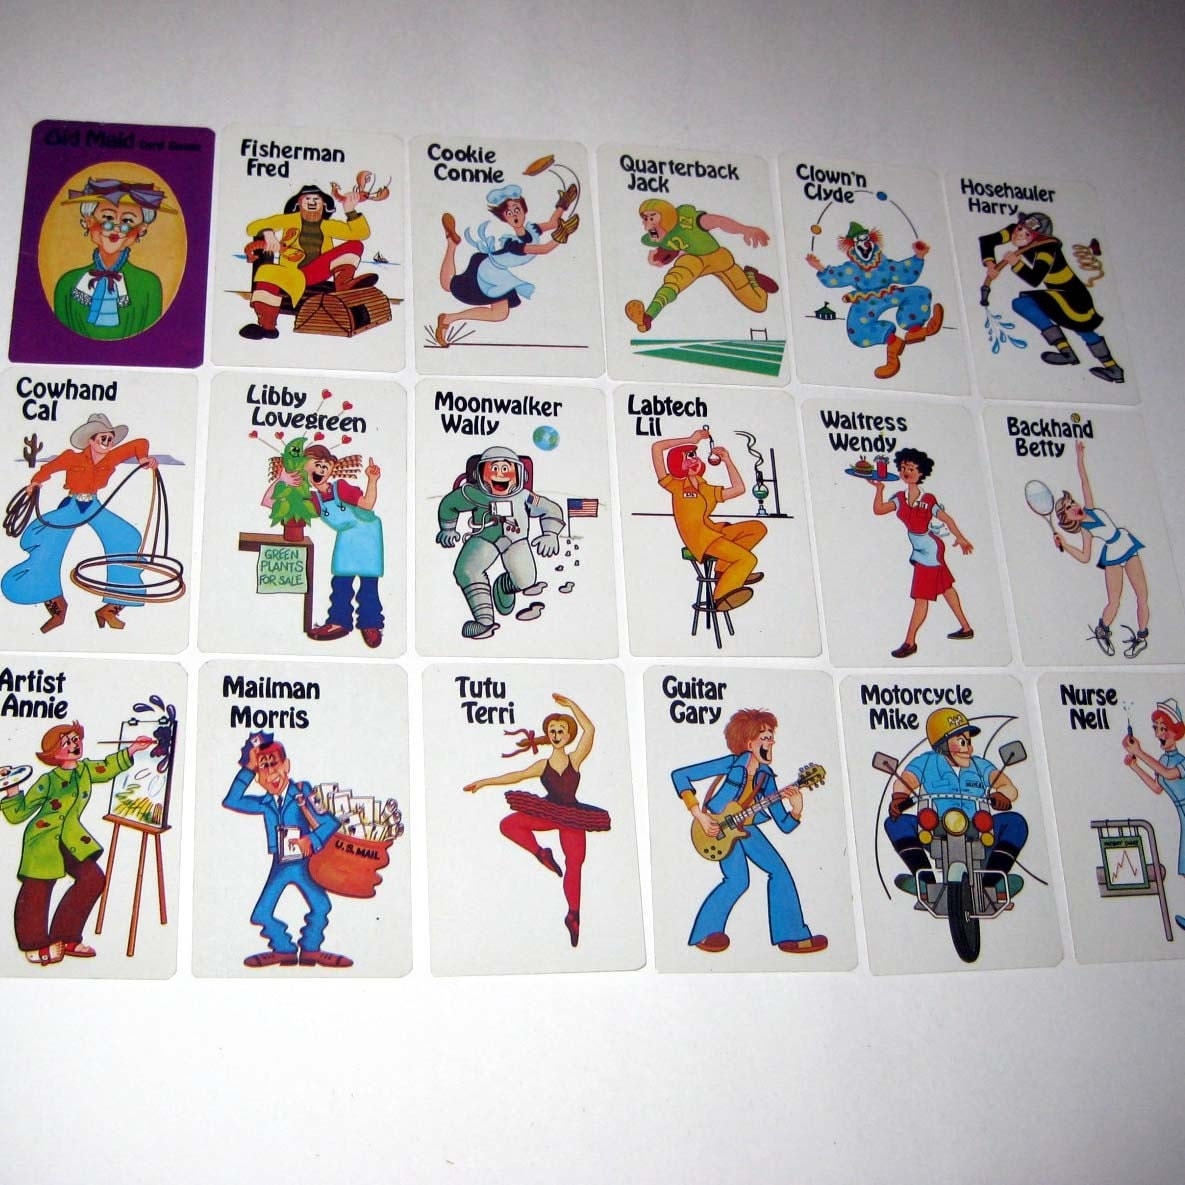 old maid card characters